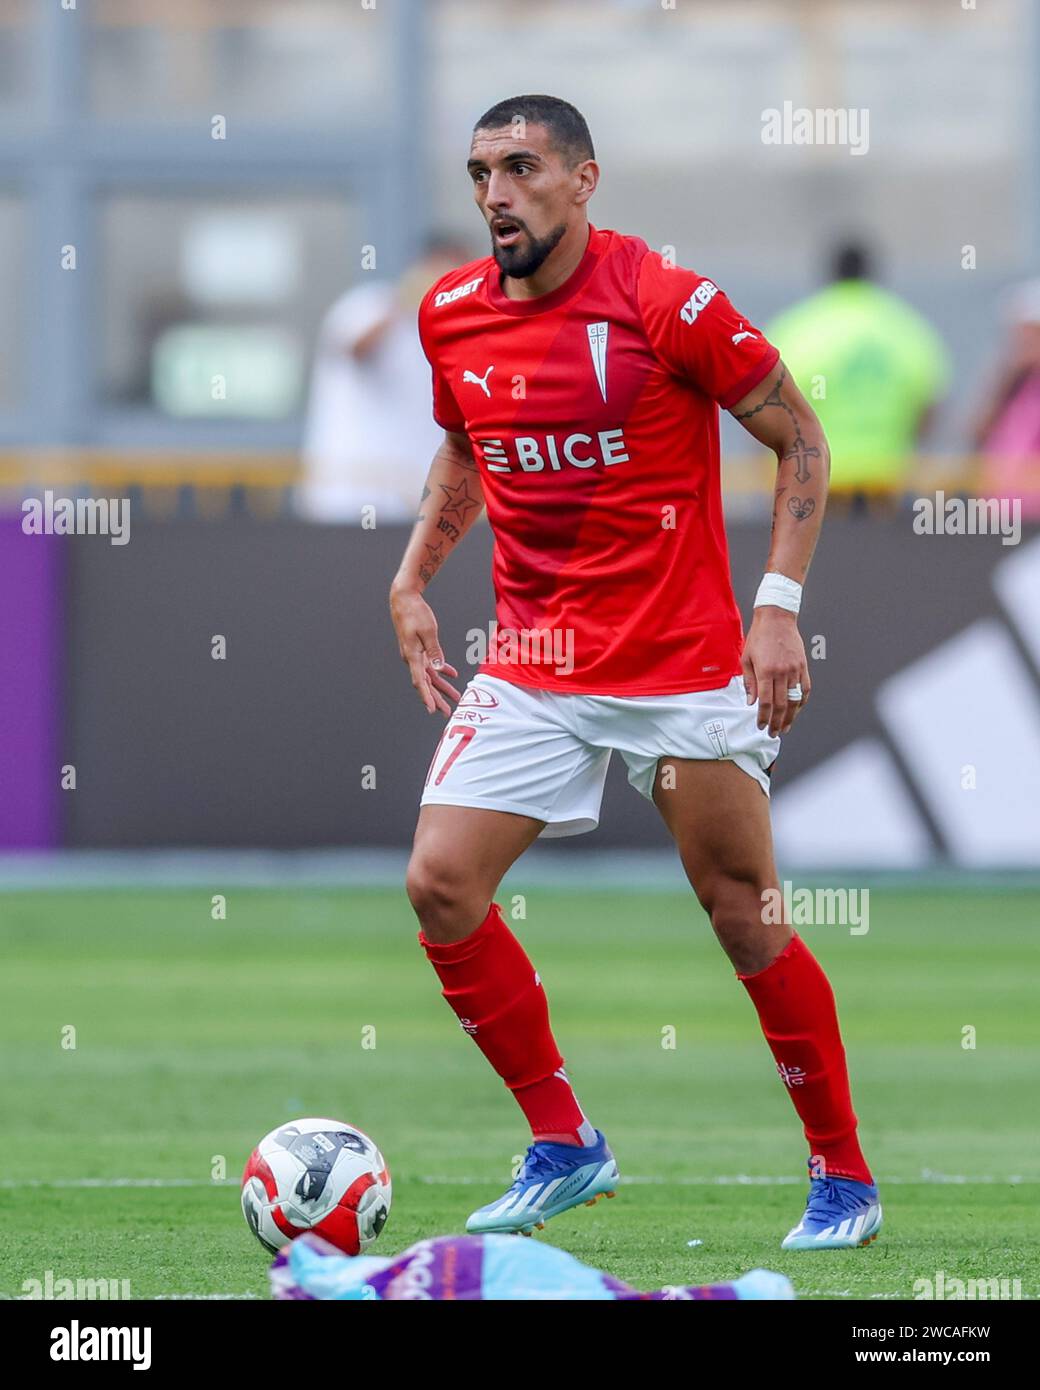 Lima, Peru. 14th Jan, 2024. Branco Ampuero of Universidad Catolica during the friendly match between Sporting Cristal and Universidad Catolica de Chile played at Nacional Stadium on January 14, 2024 in Lima, Peru. (Photo by Miguel Marrufo/PRESSINPHOTO) Credit: PRESSINPHOTO SPORTS AGENCY/Alamy Live News Stock Photo